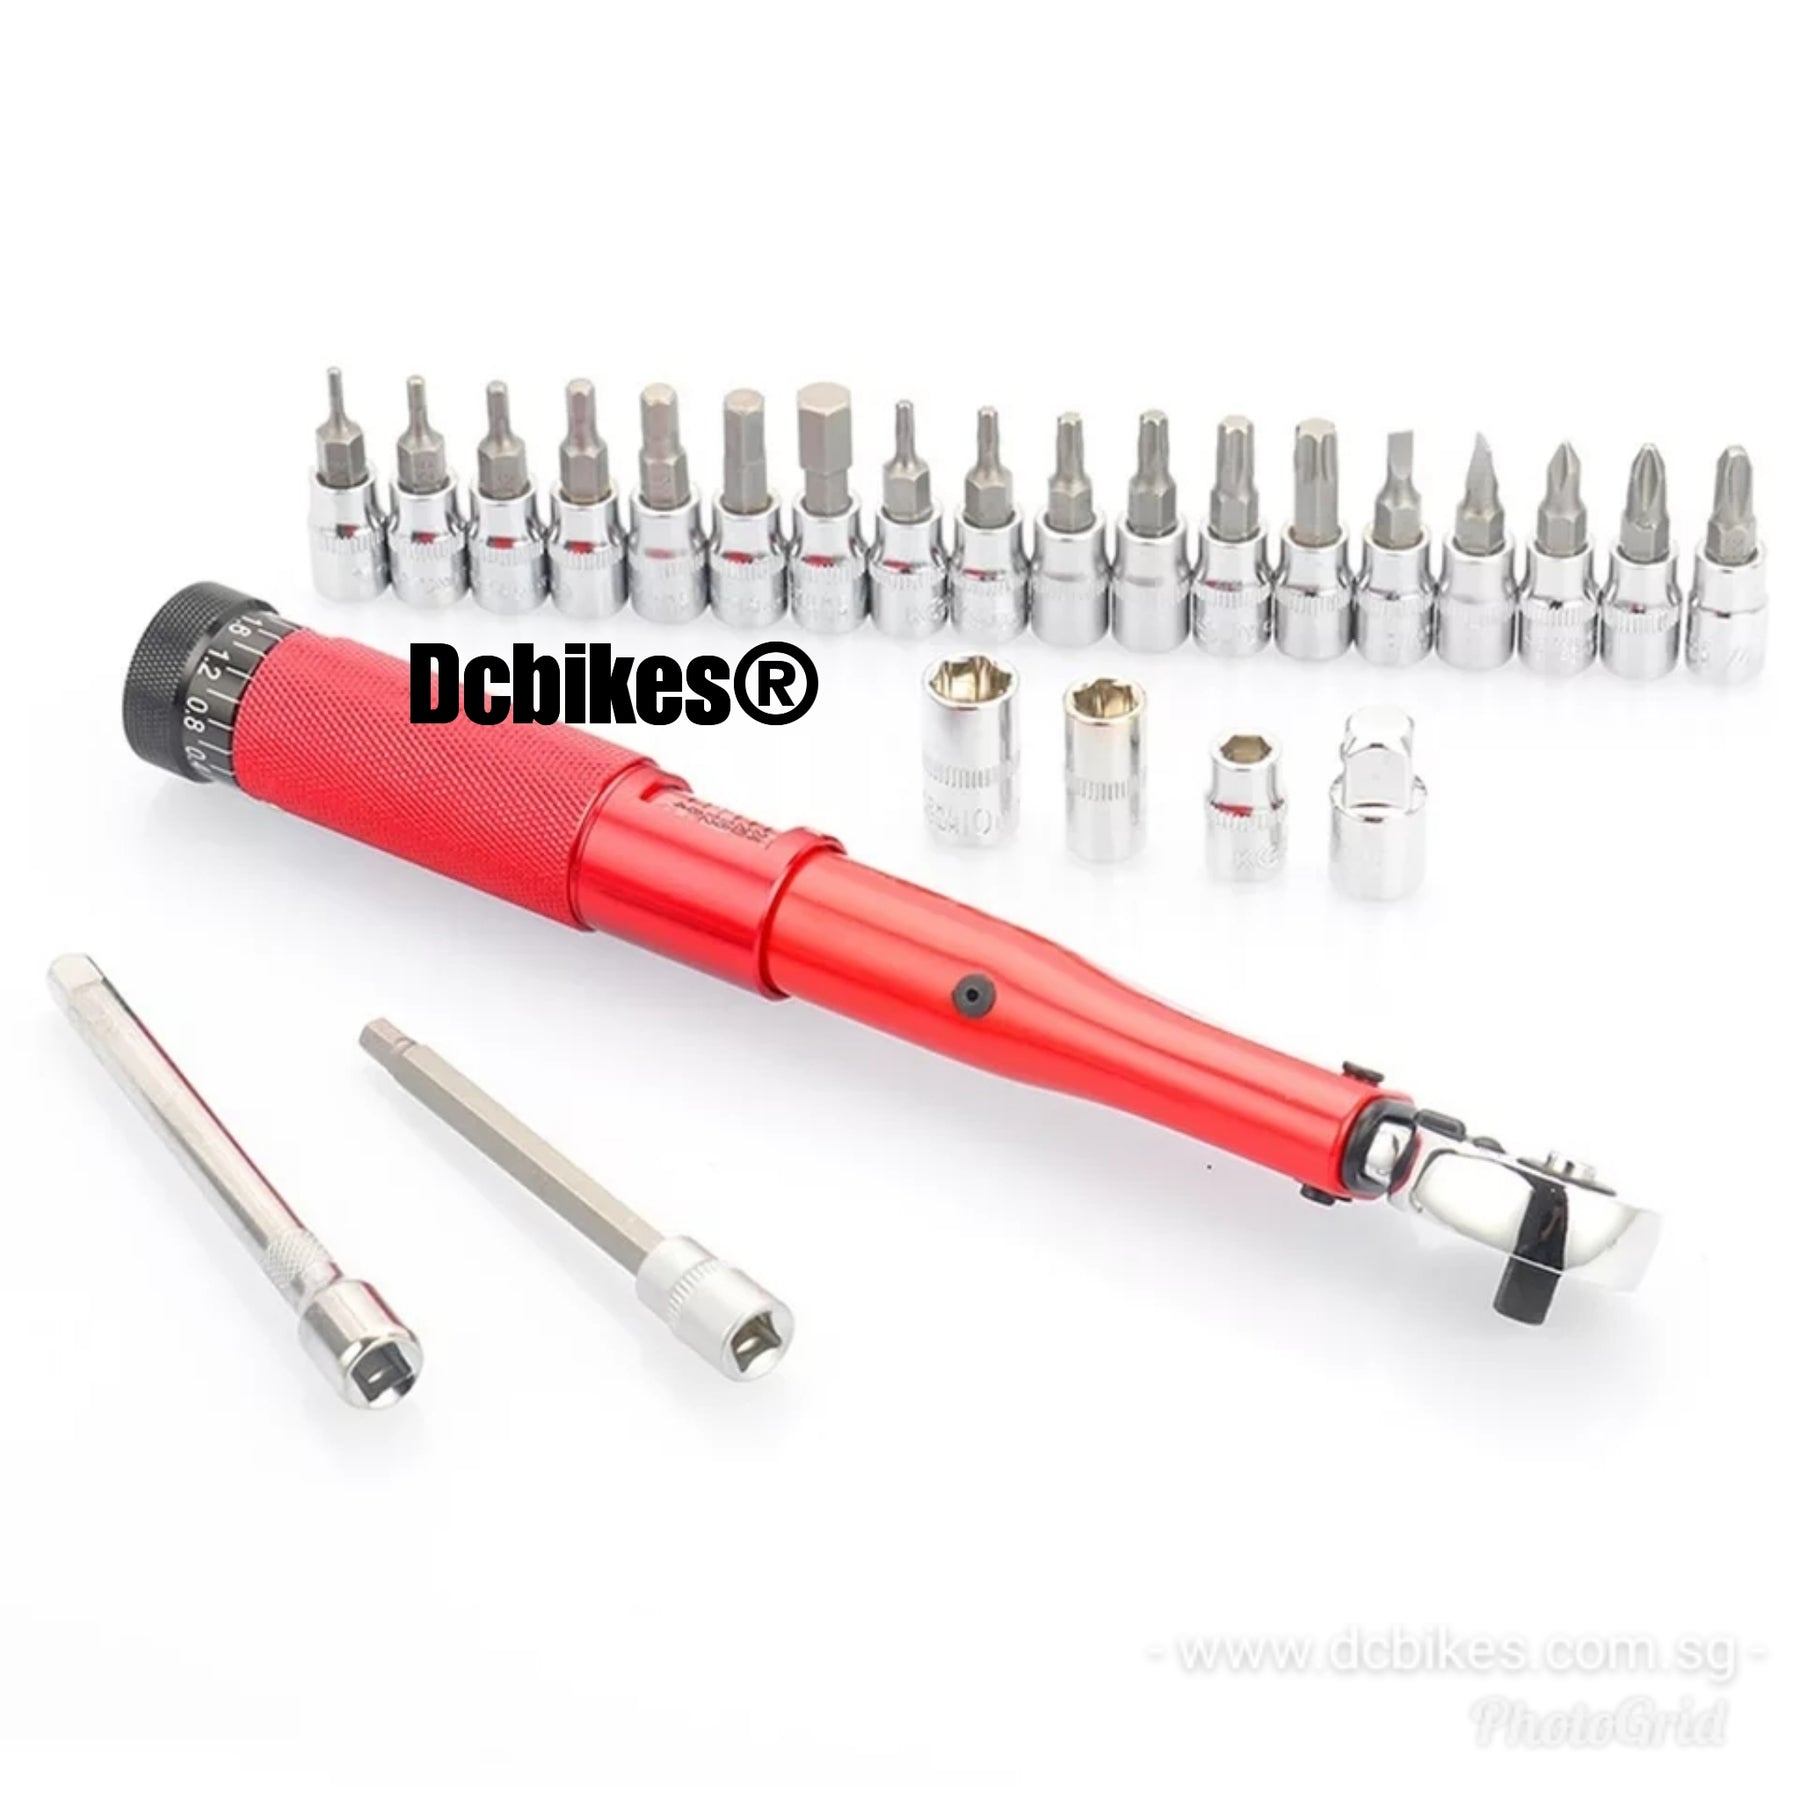 HASKYY Torque Wrench Set 3/8 Inch 5-60 Nm Motorcycle Chopper Custom Bike  with Many Accessories such as Extension Rod, Bits, Nut Inserts, Adapters